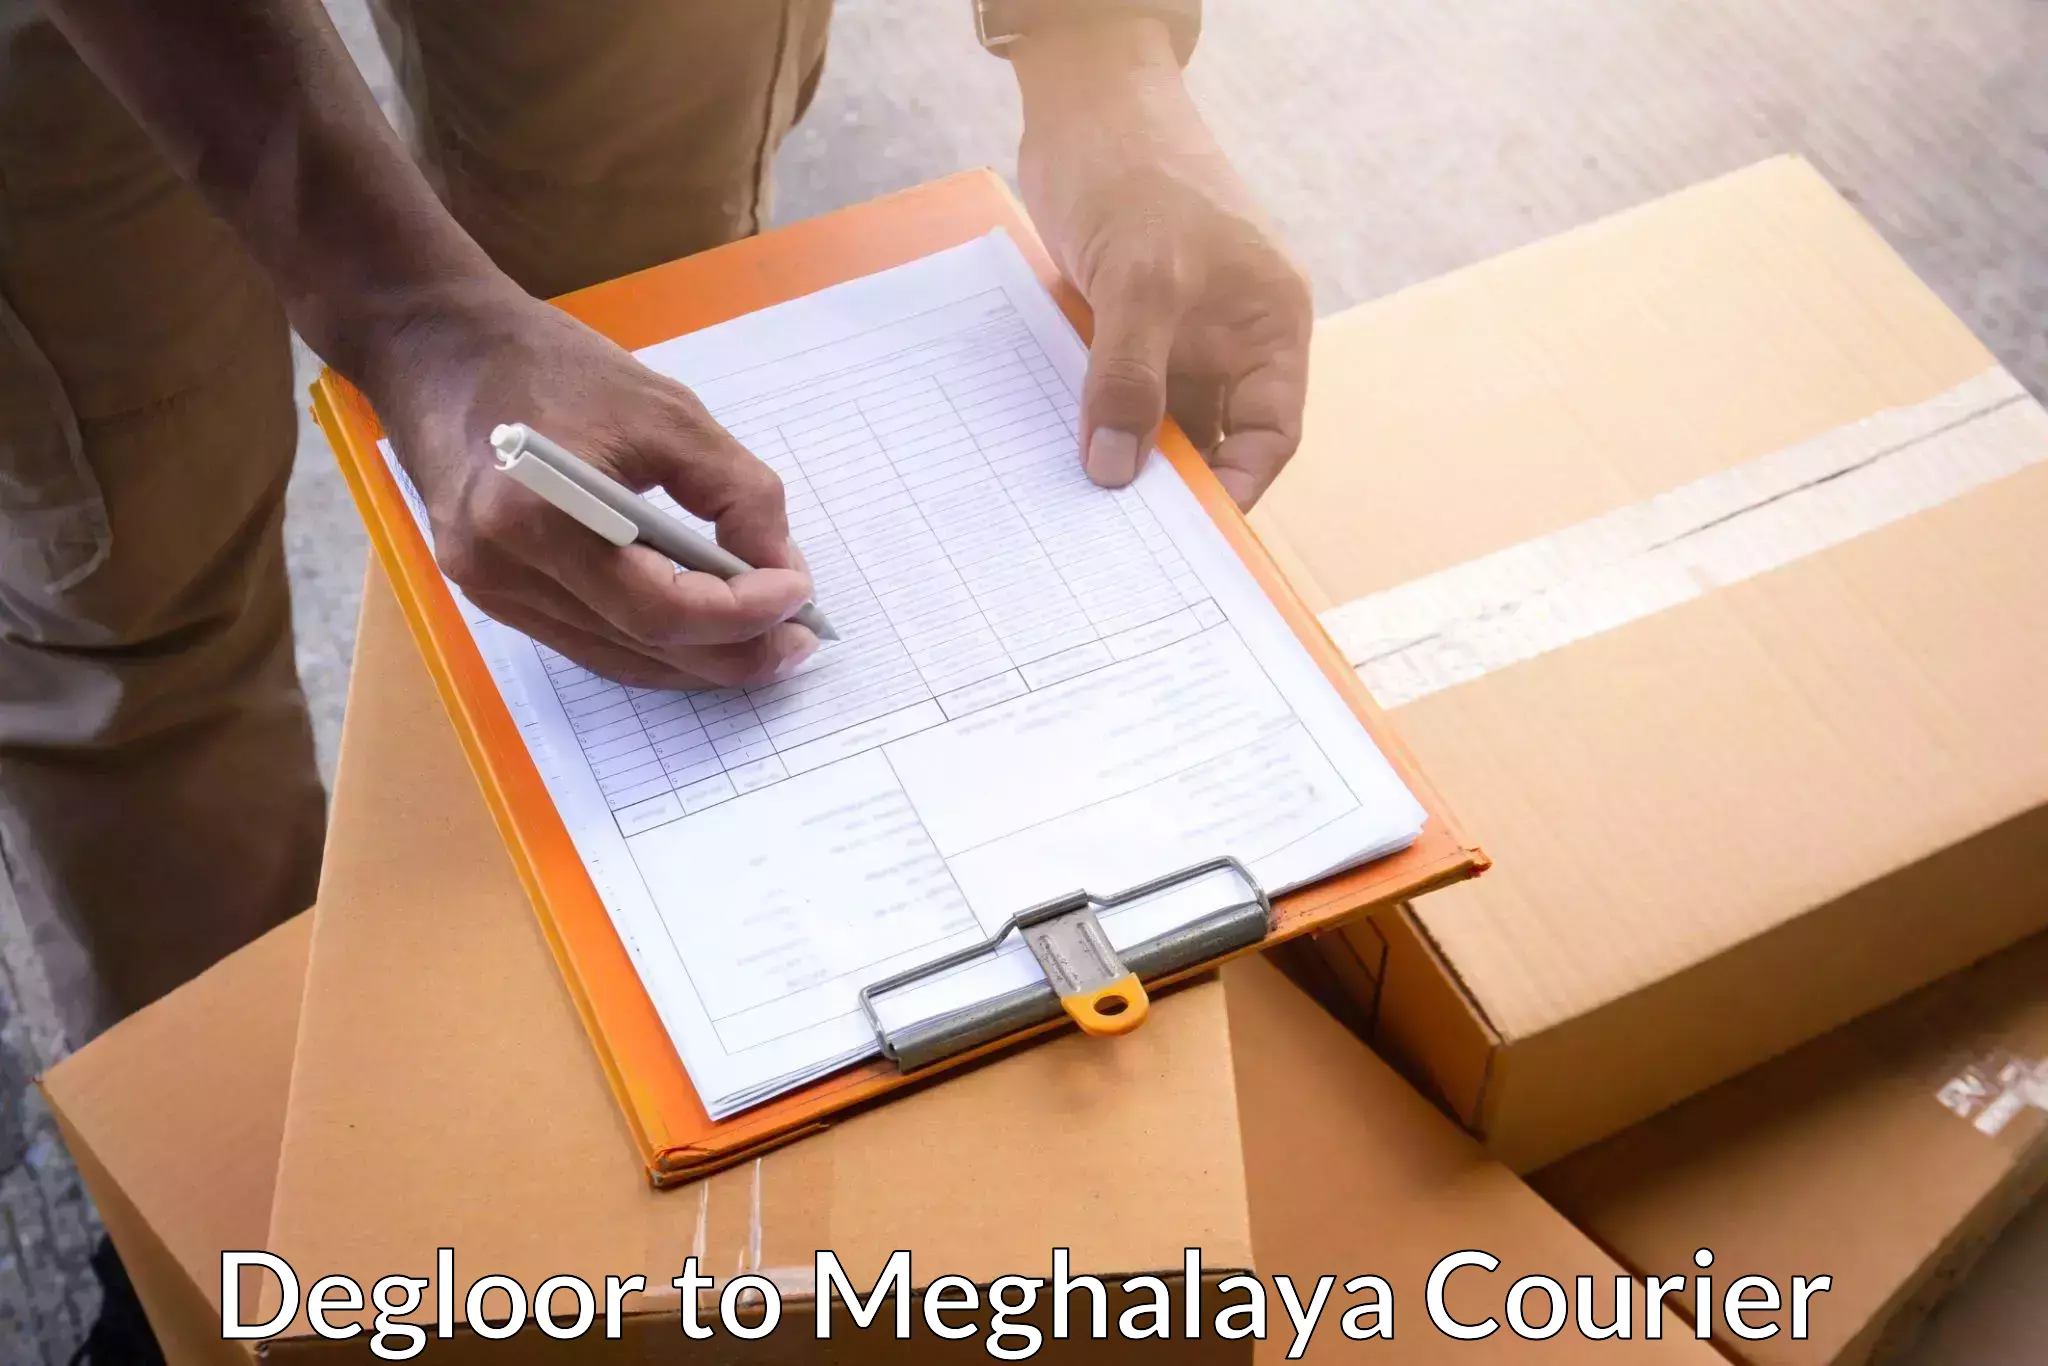 24/7 courier service Degloor to Meghalaya